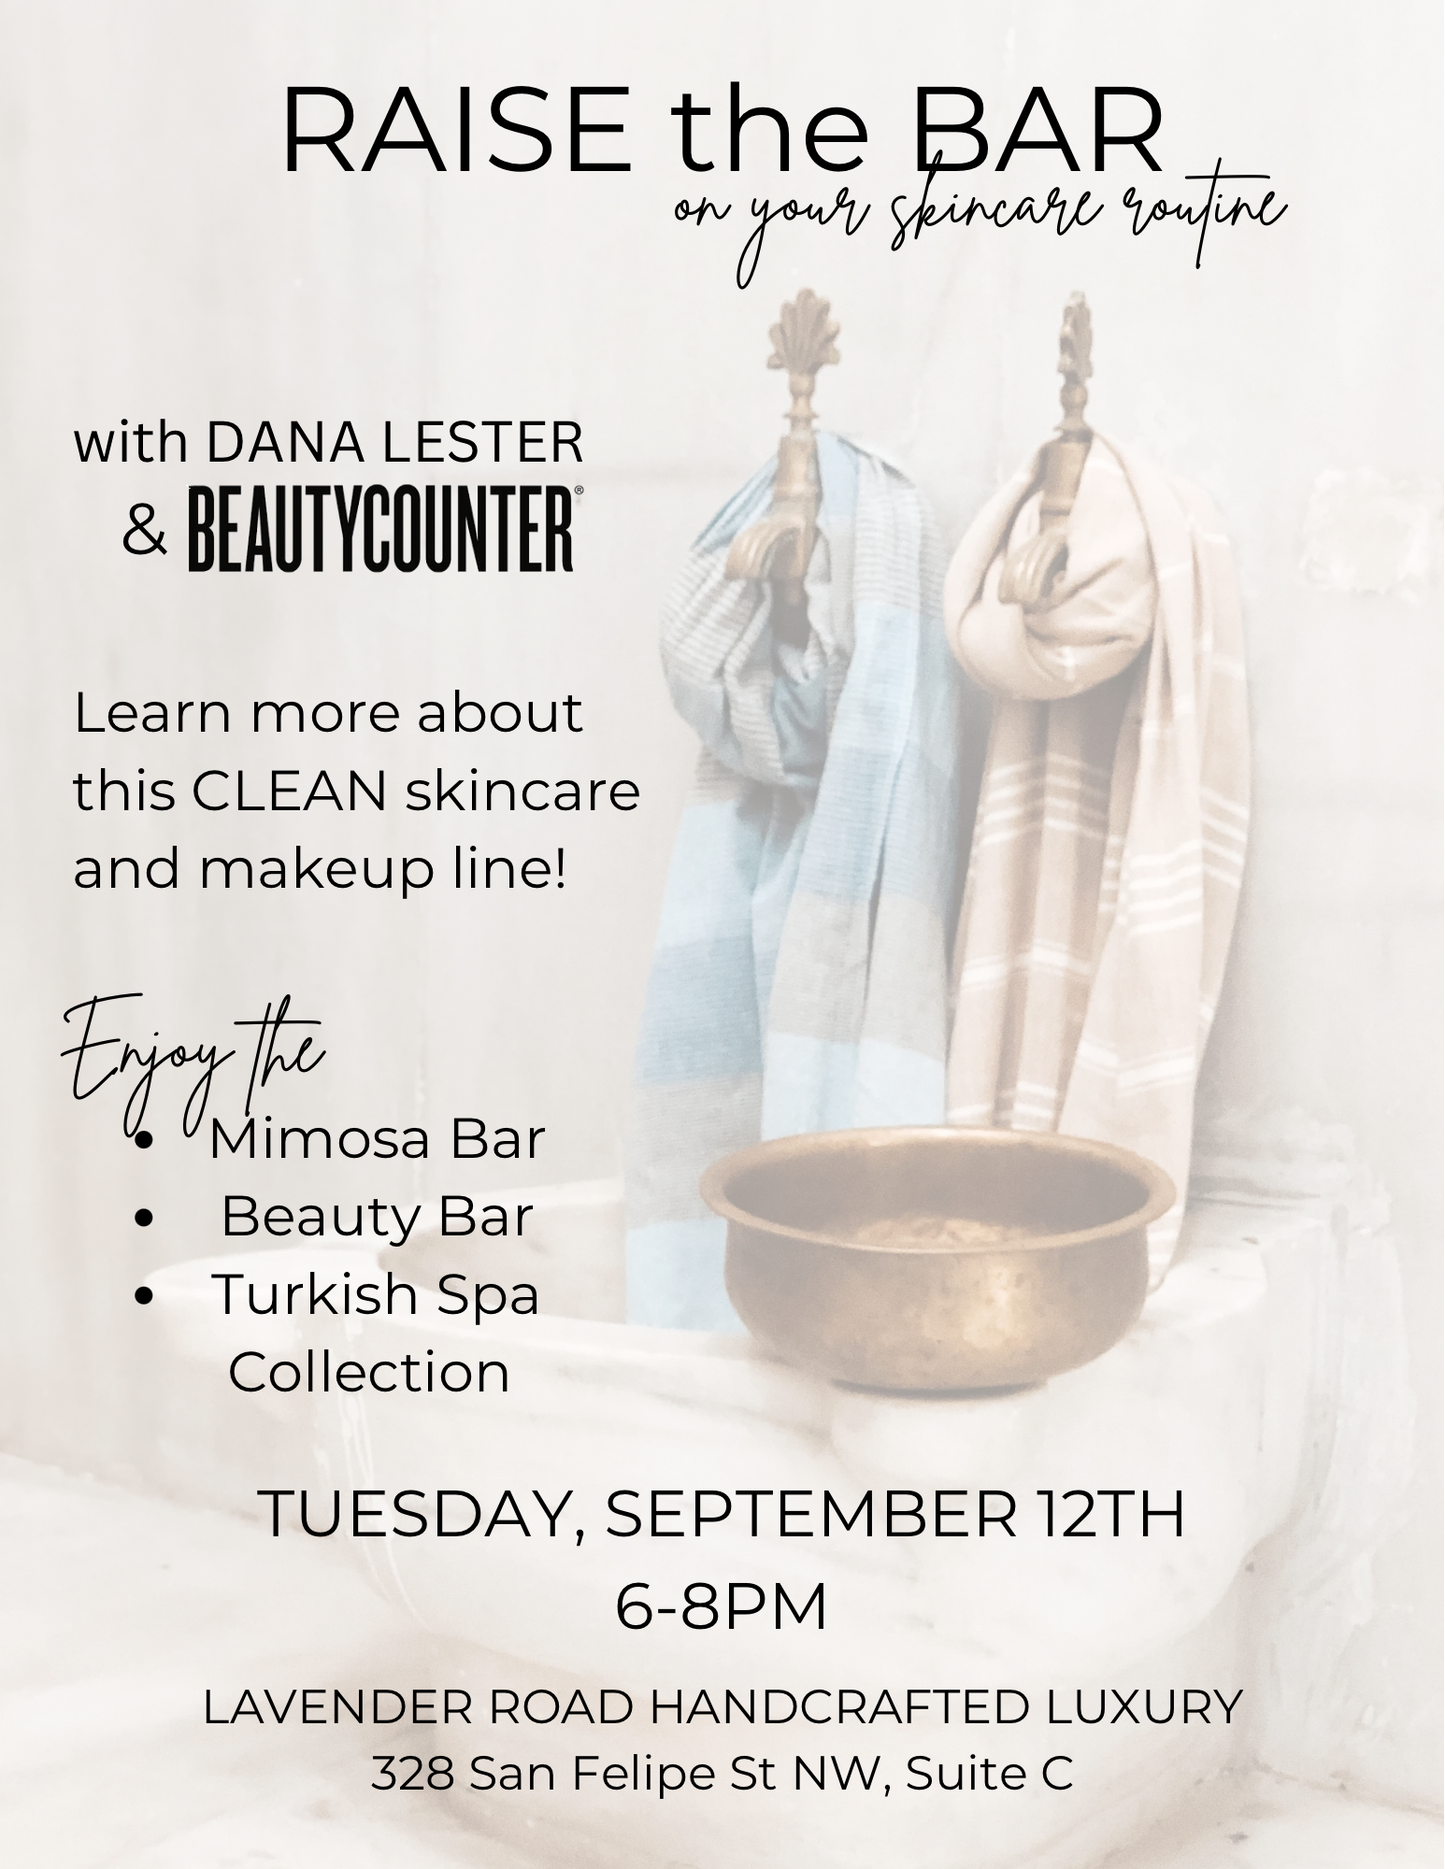 Raise the Bar Beauty & Mimosa Event: Tuesday, September 12th 6-8pm (FREE)